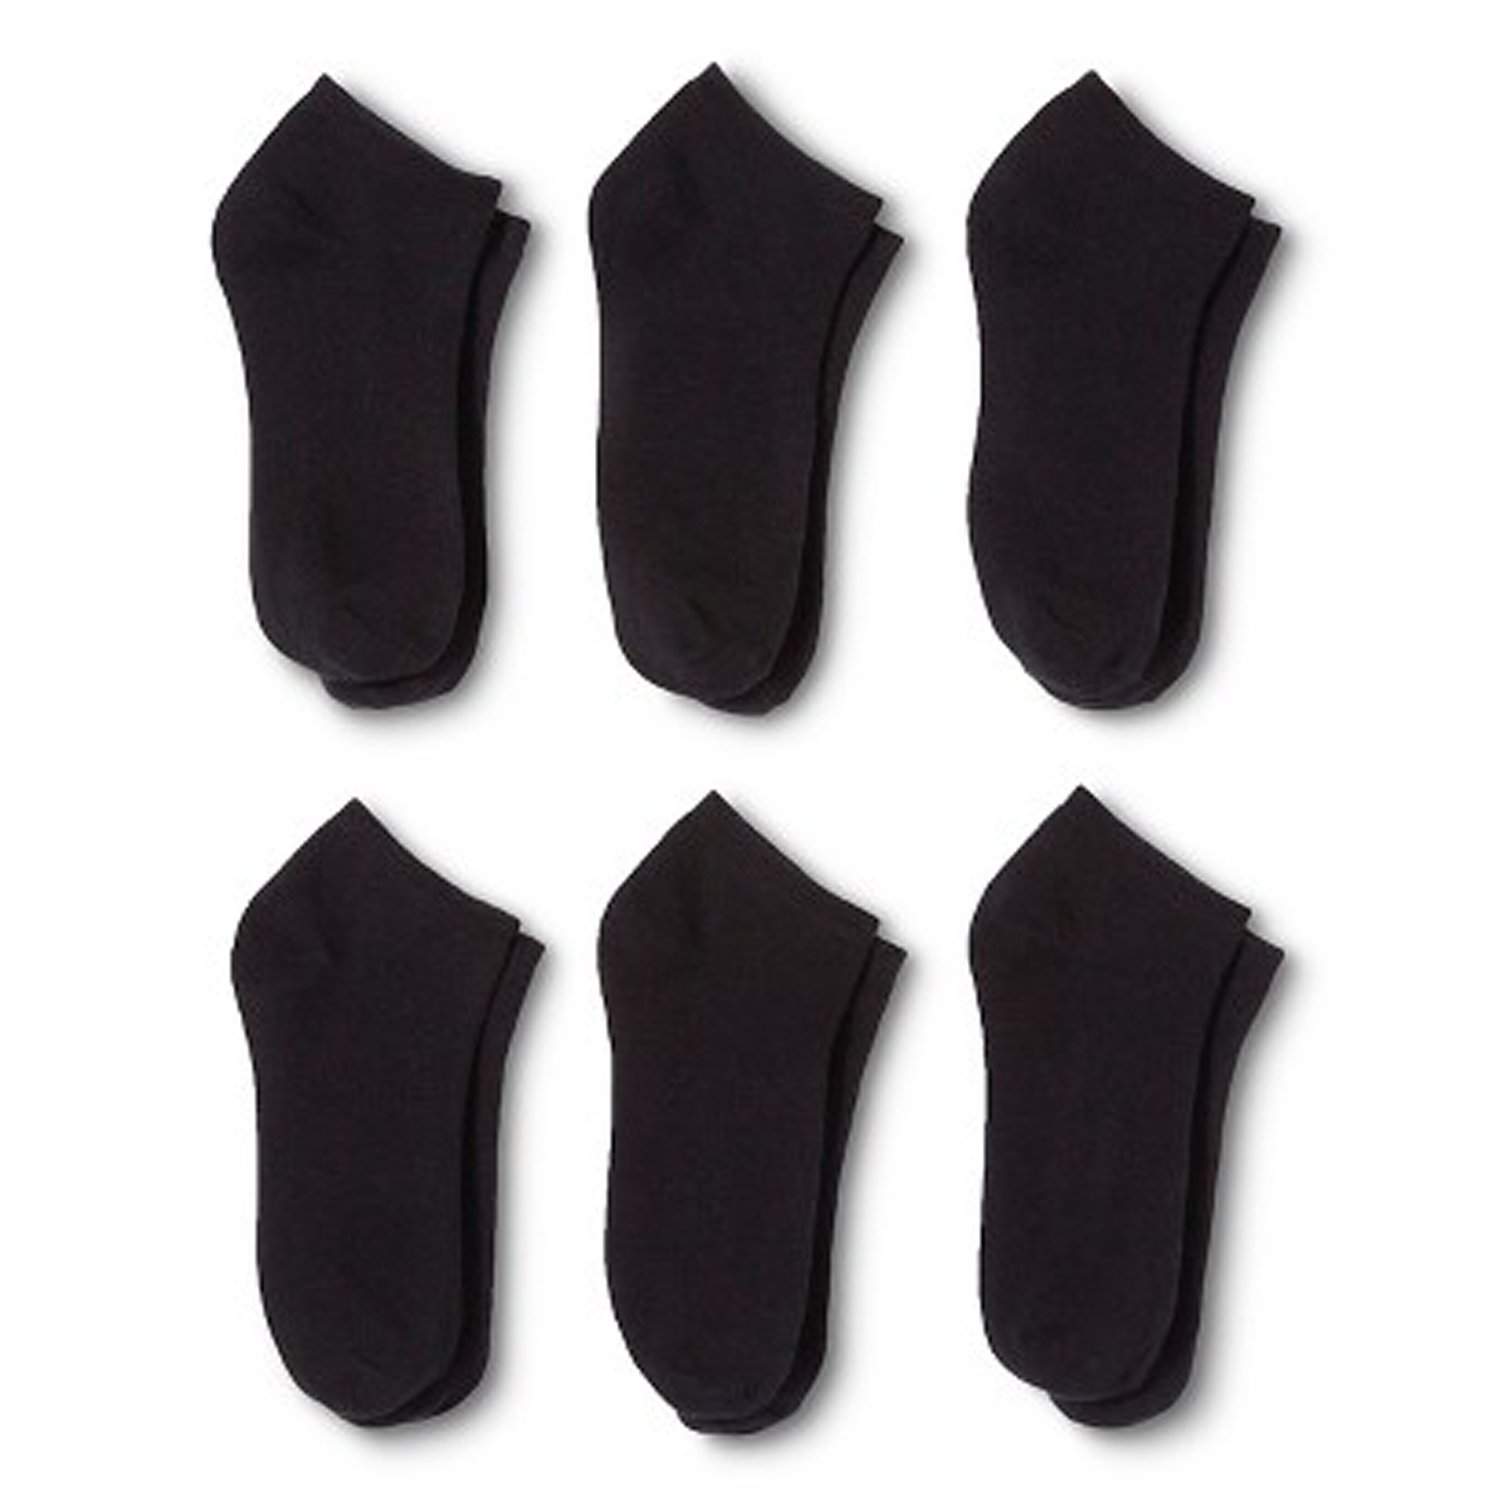 Polyester Low Cut Socks Ankle, No Show Men and Women Socks - 12 Pack